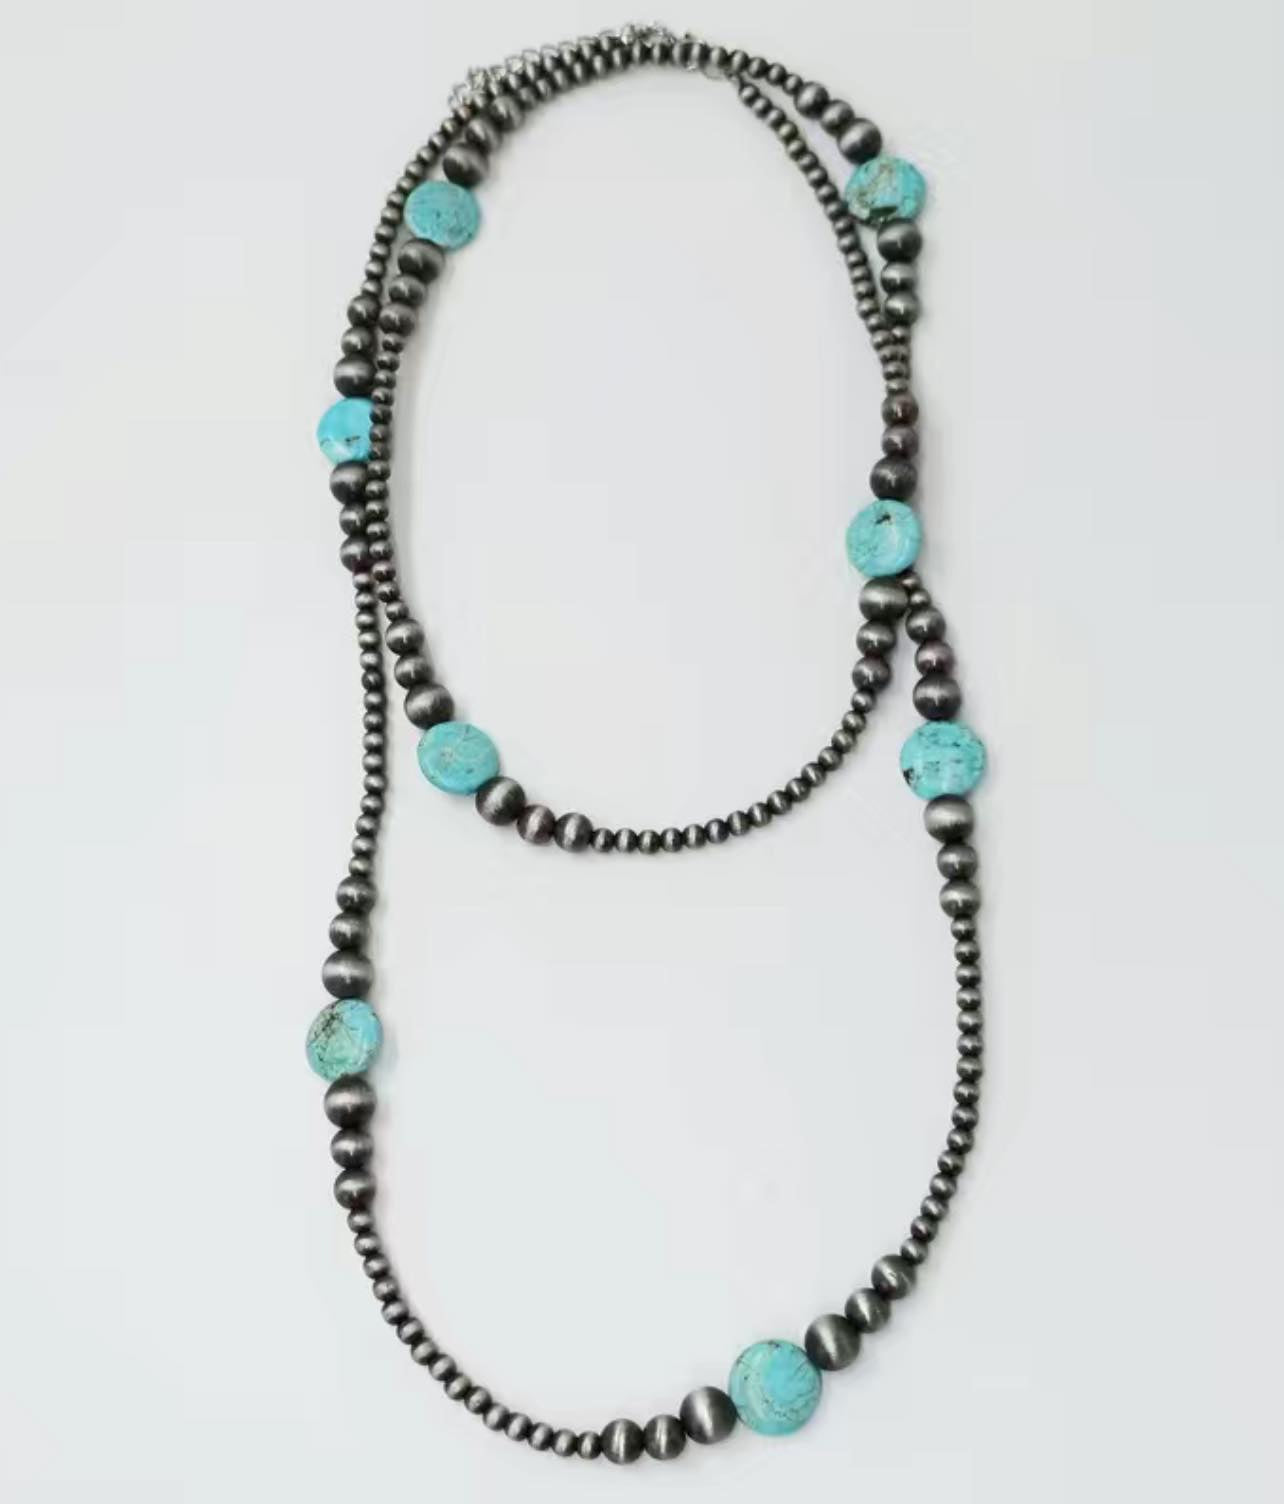 Long Turquoise and Navajo Necklace